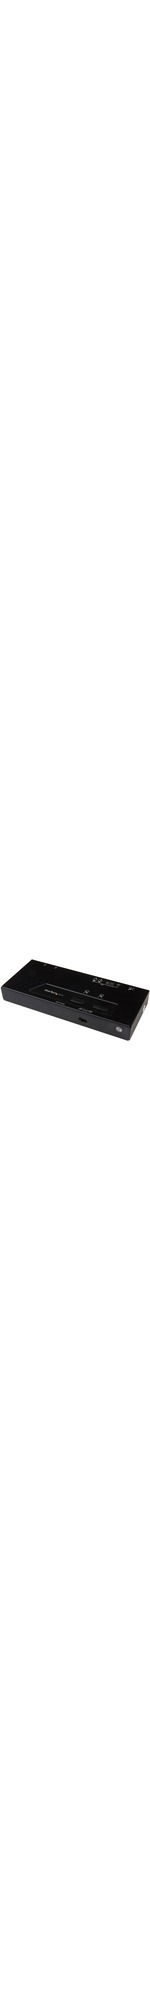 StarTech.com 2x2 HDMI Matrix Switch - 4K with Fast Switching, Auto-sensing and Serial Control